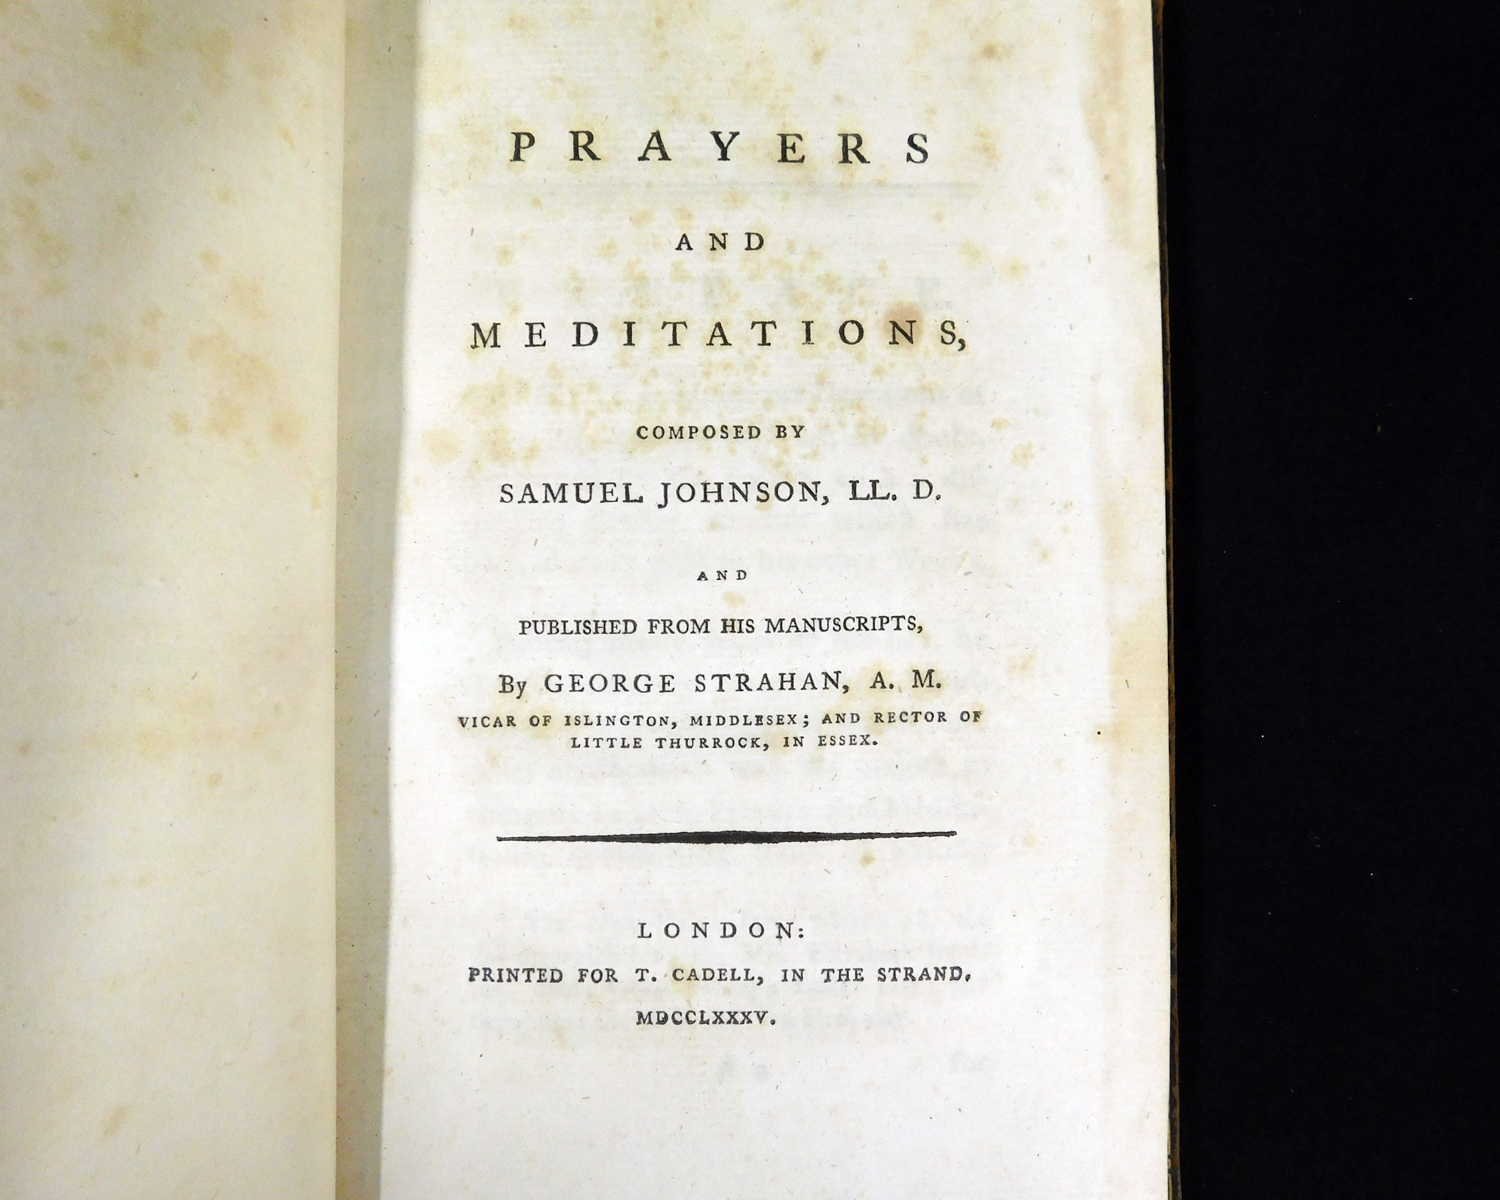 SAMUEL JOHNSON: PRAYERS AND MEDITATIONS, London, for T Cadell, 1785, 1st edition, 1pp adverts at